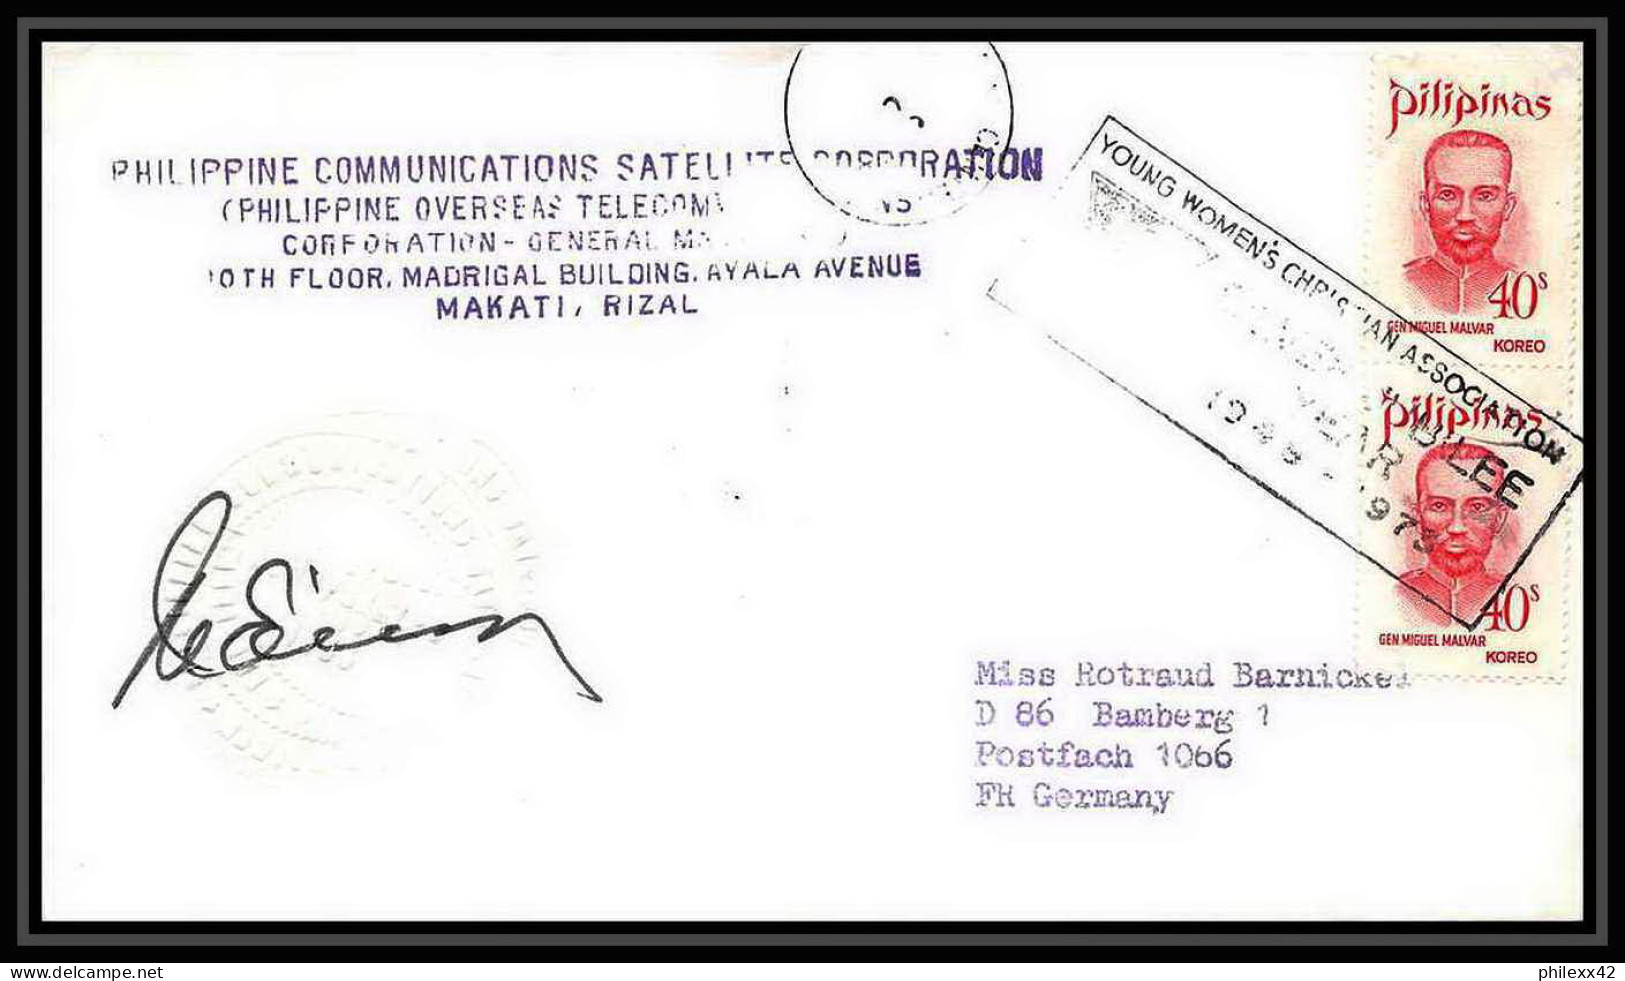 7100/ Espace (space) Lettre (cover) Signé (signed Autograph) 22/9/1973 Skylab 3 Markati Rizal Philippines (pilipinas) - Asie